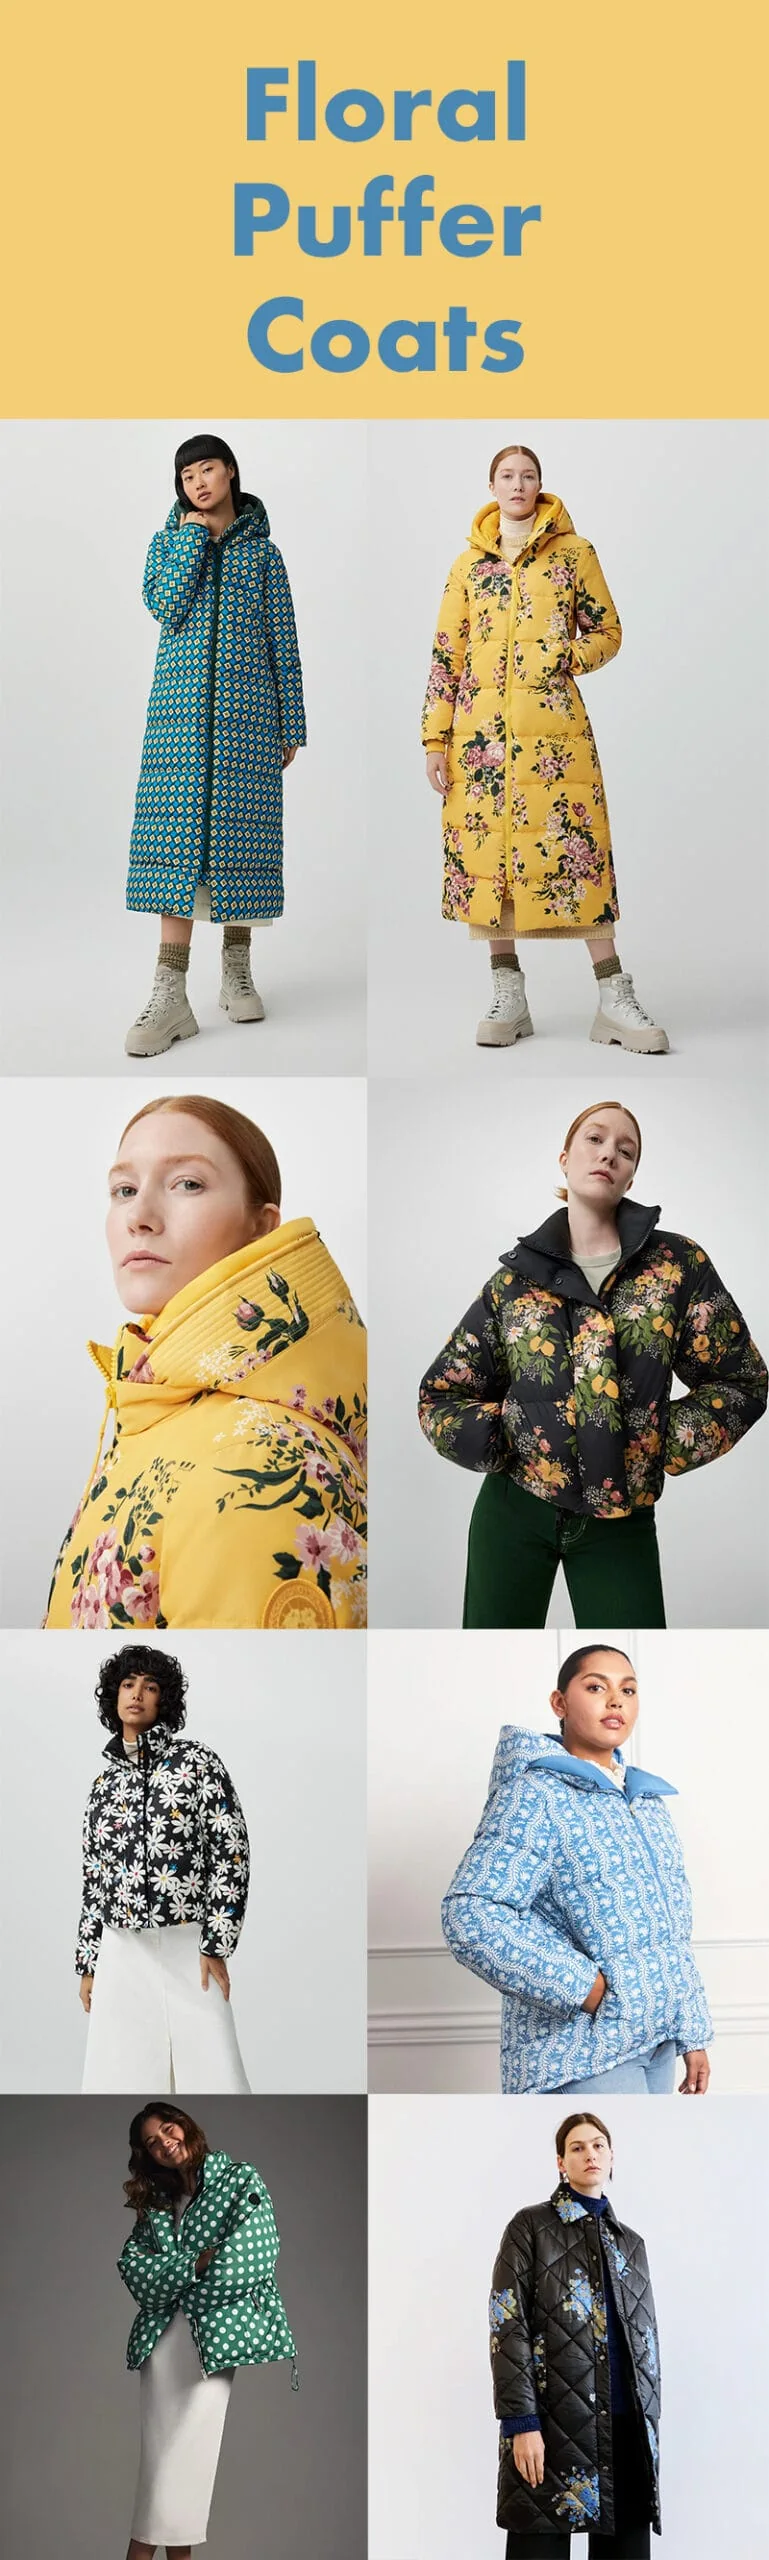 Floral winter coats - The House That Lars Built